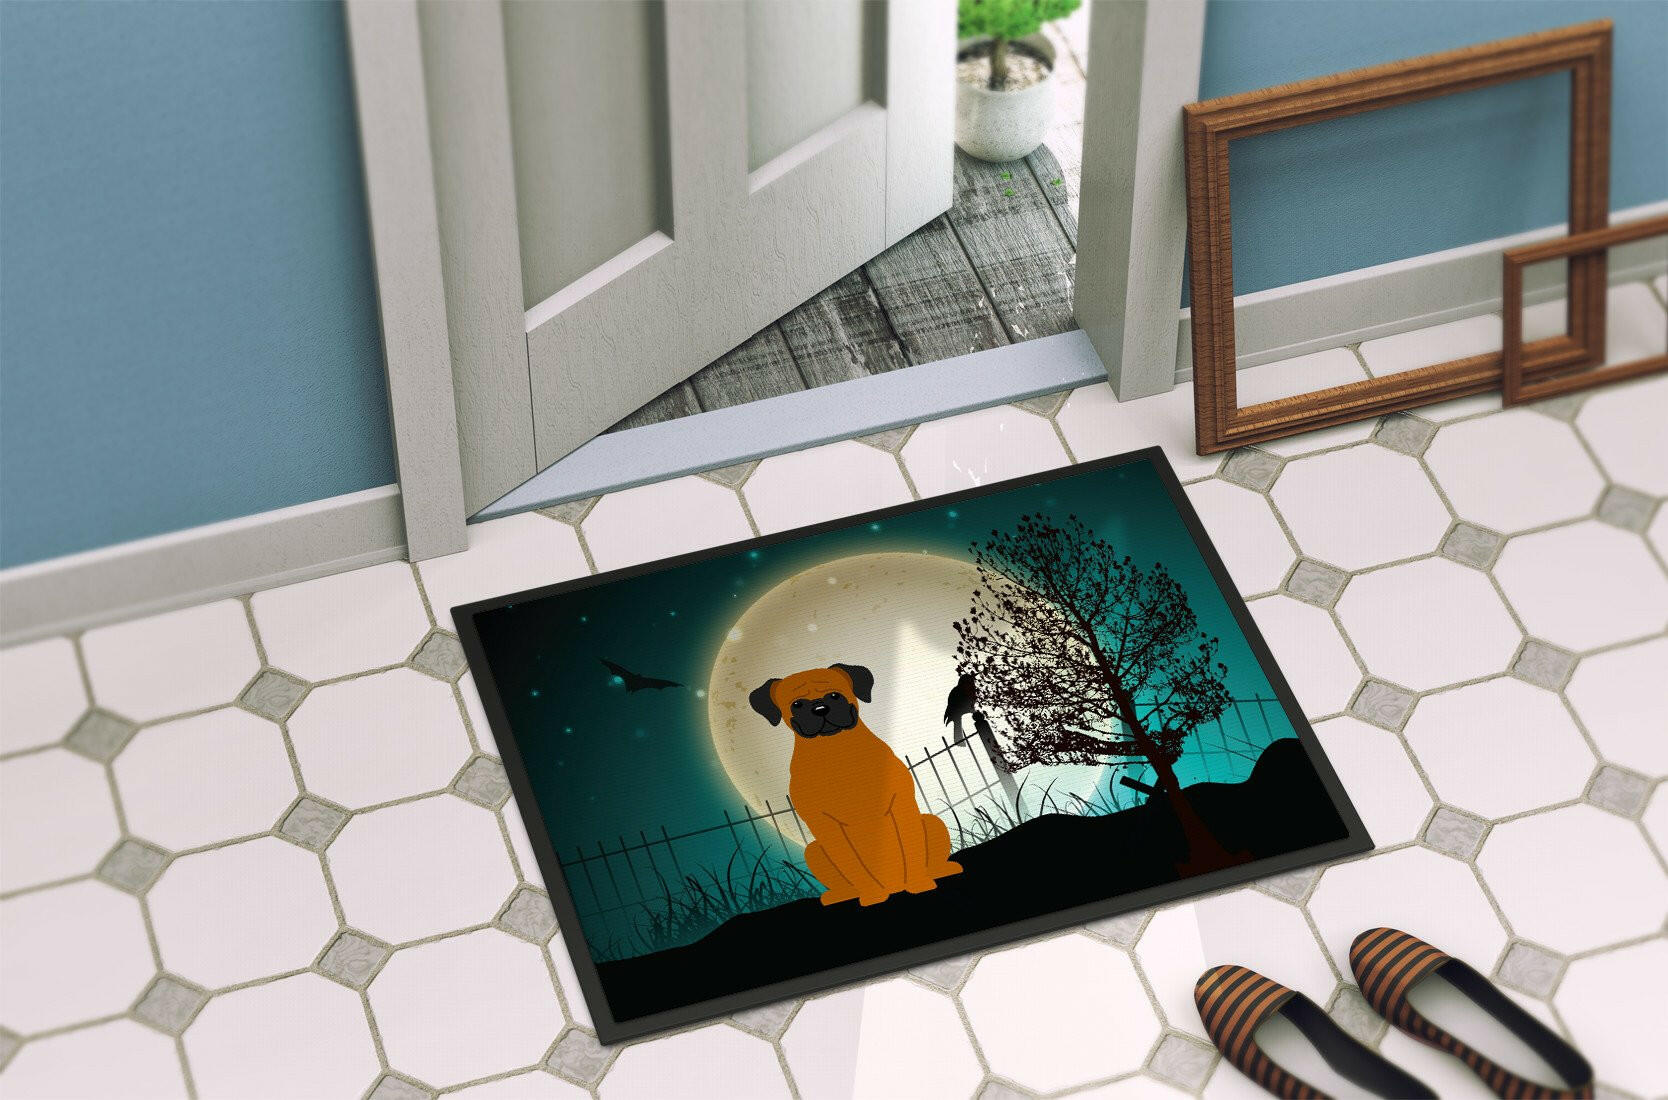 Halloween Scary Fawn Boxer Indoor or Outdoor Mat 24x36 BB2305JMAT - the-store.com